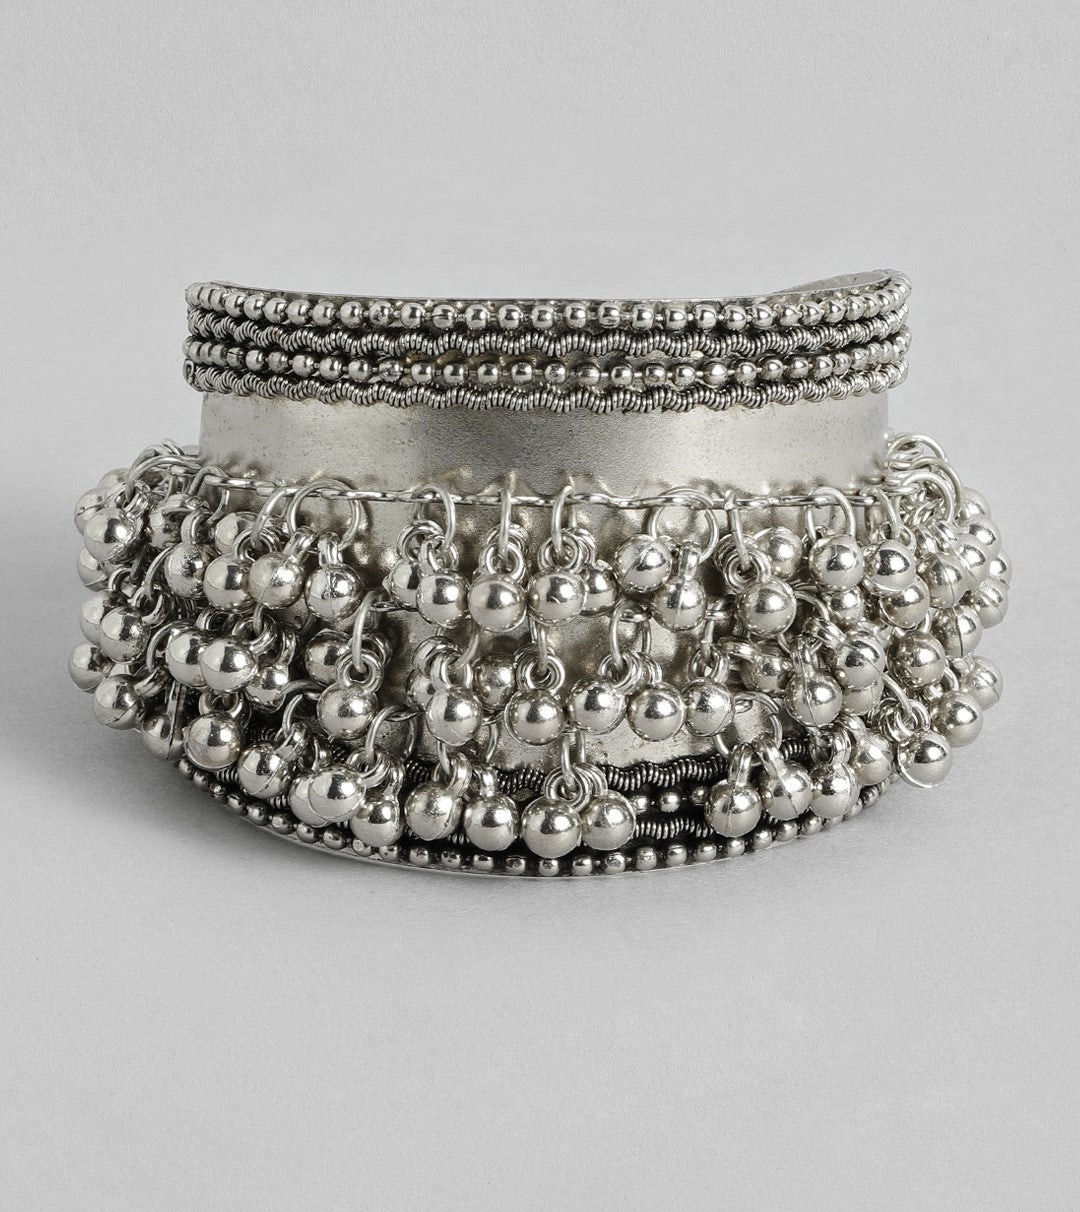 51-756-075-3 Cuff Bracelet with Edges, 3/4 - Silver Plated - Rings & Things